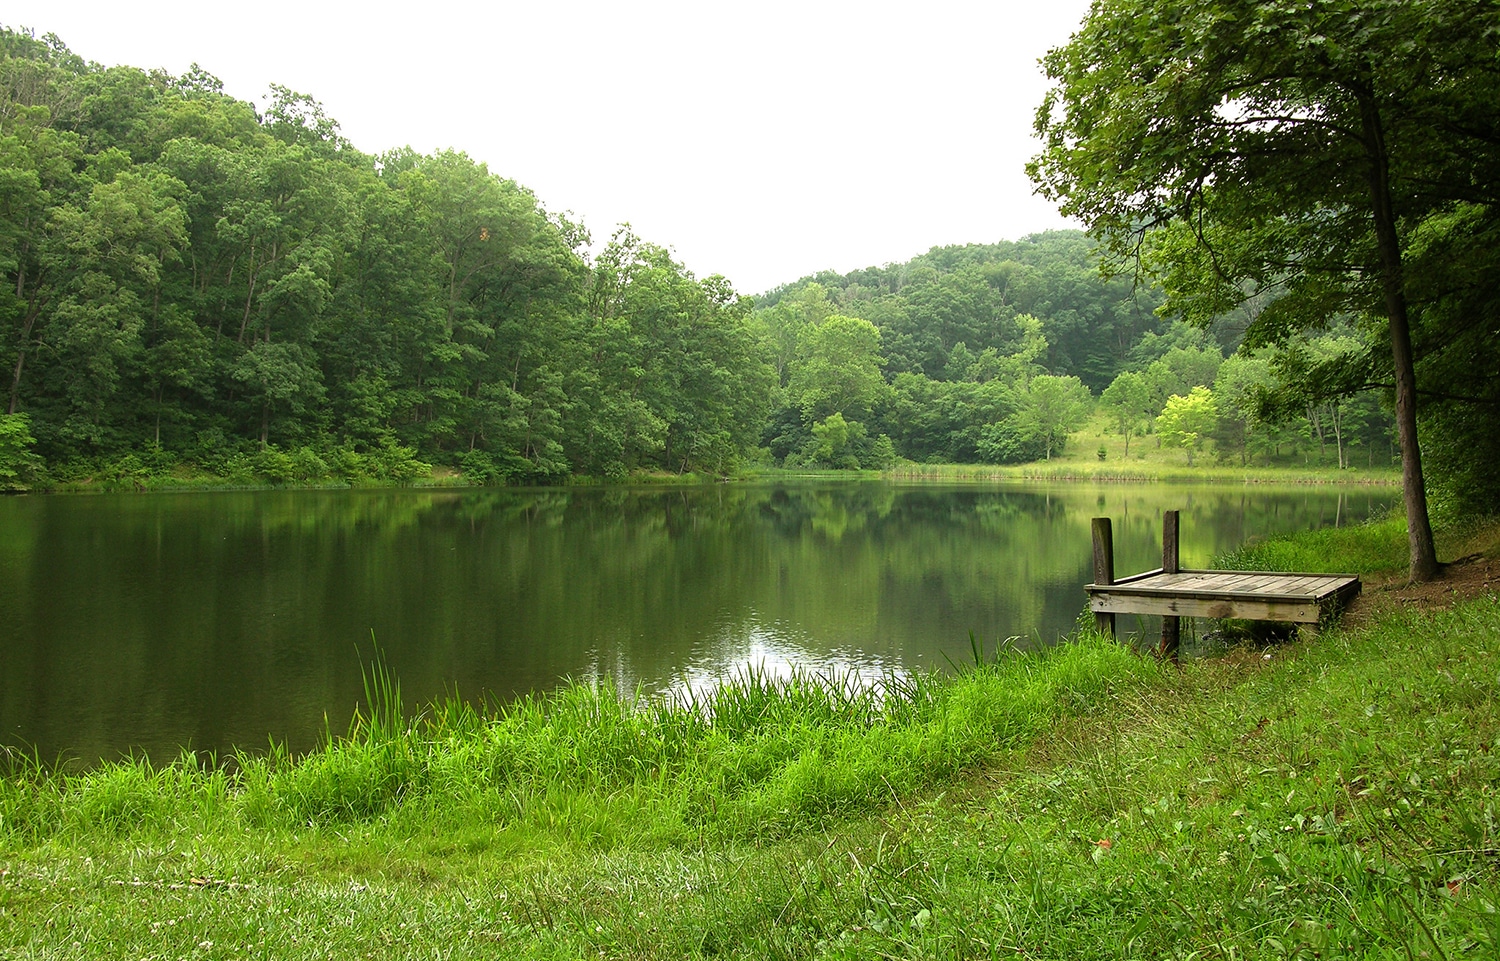 horizontal photo of Caldwell Lake with grass in the foreground and trees and foliage in the background